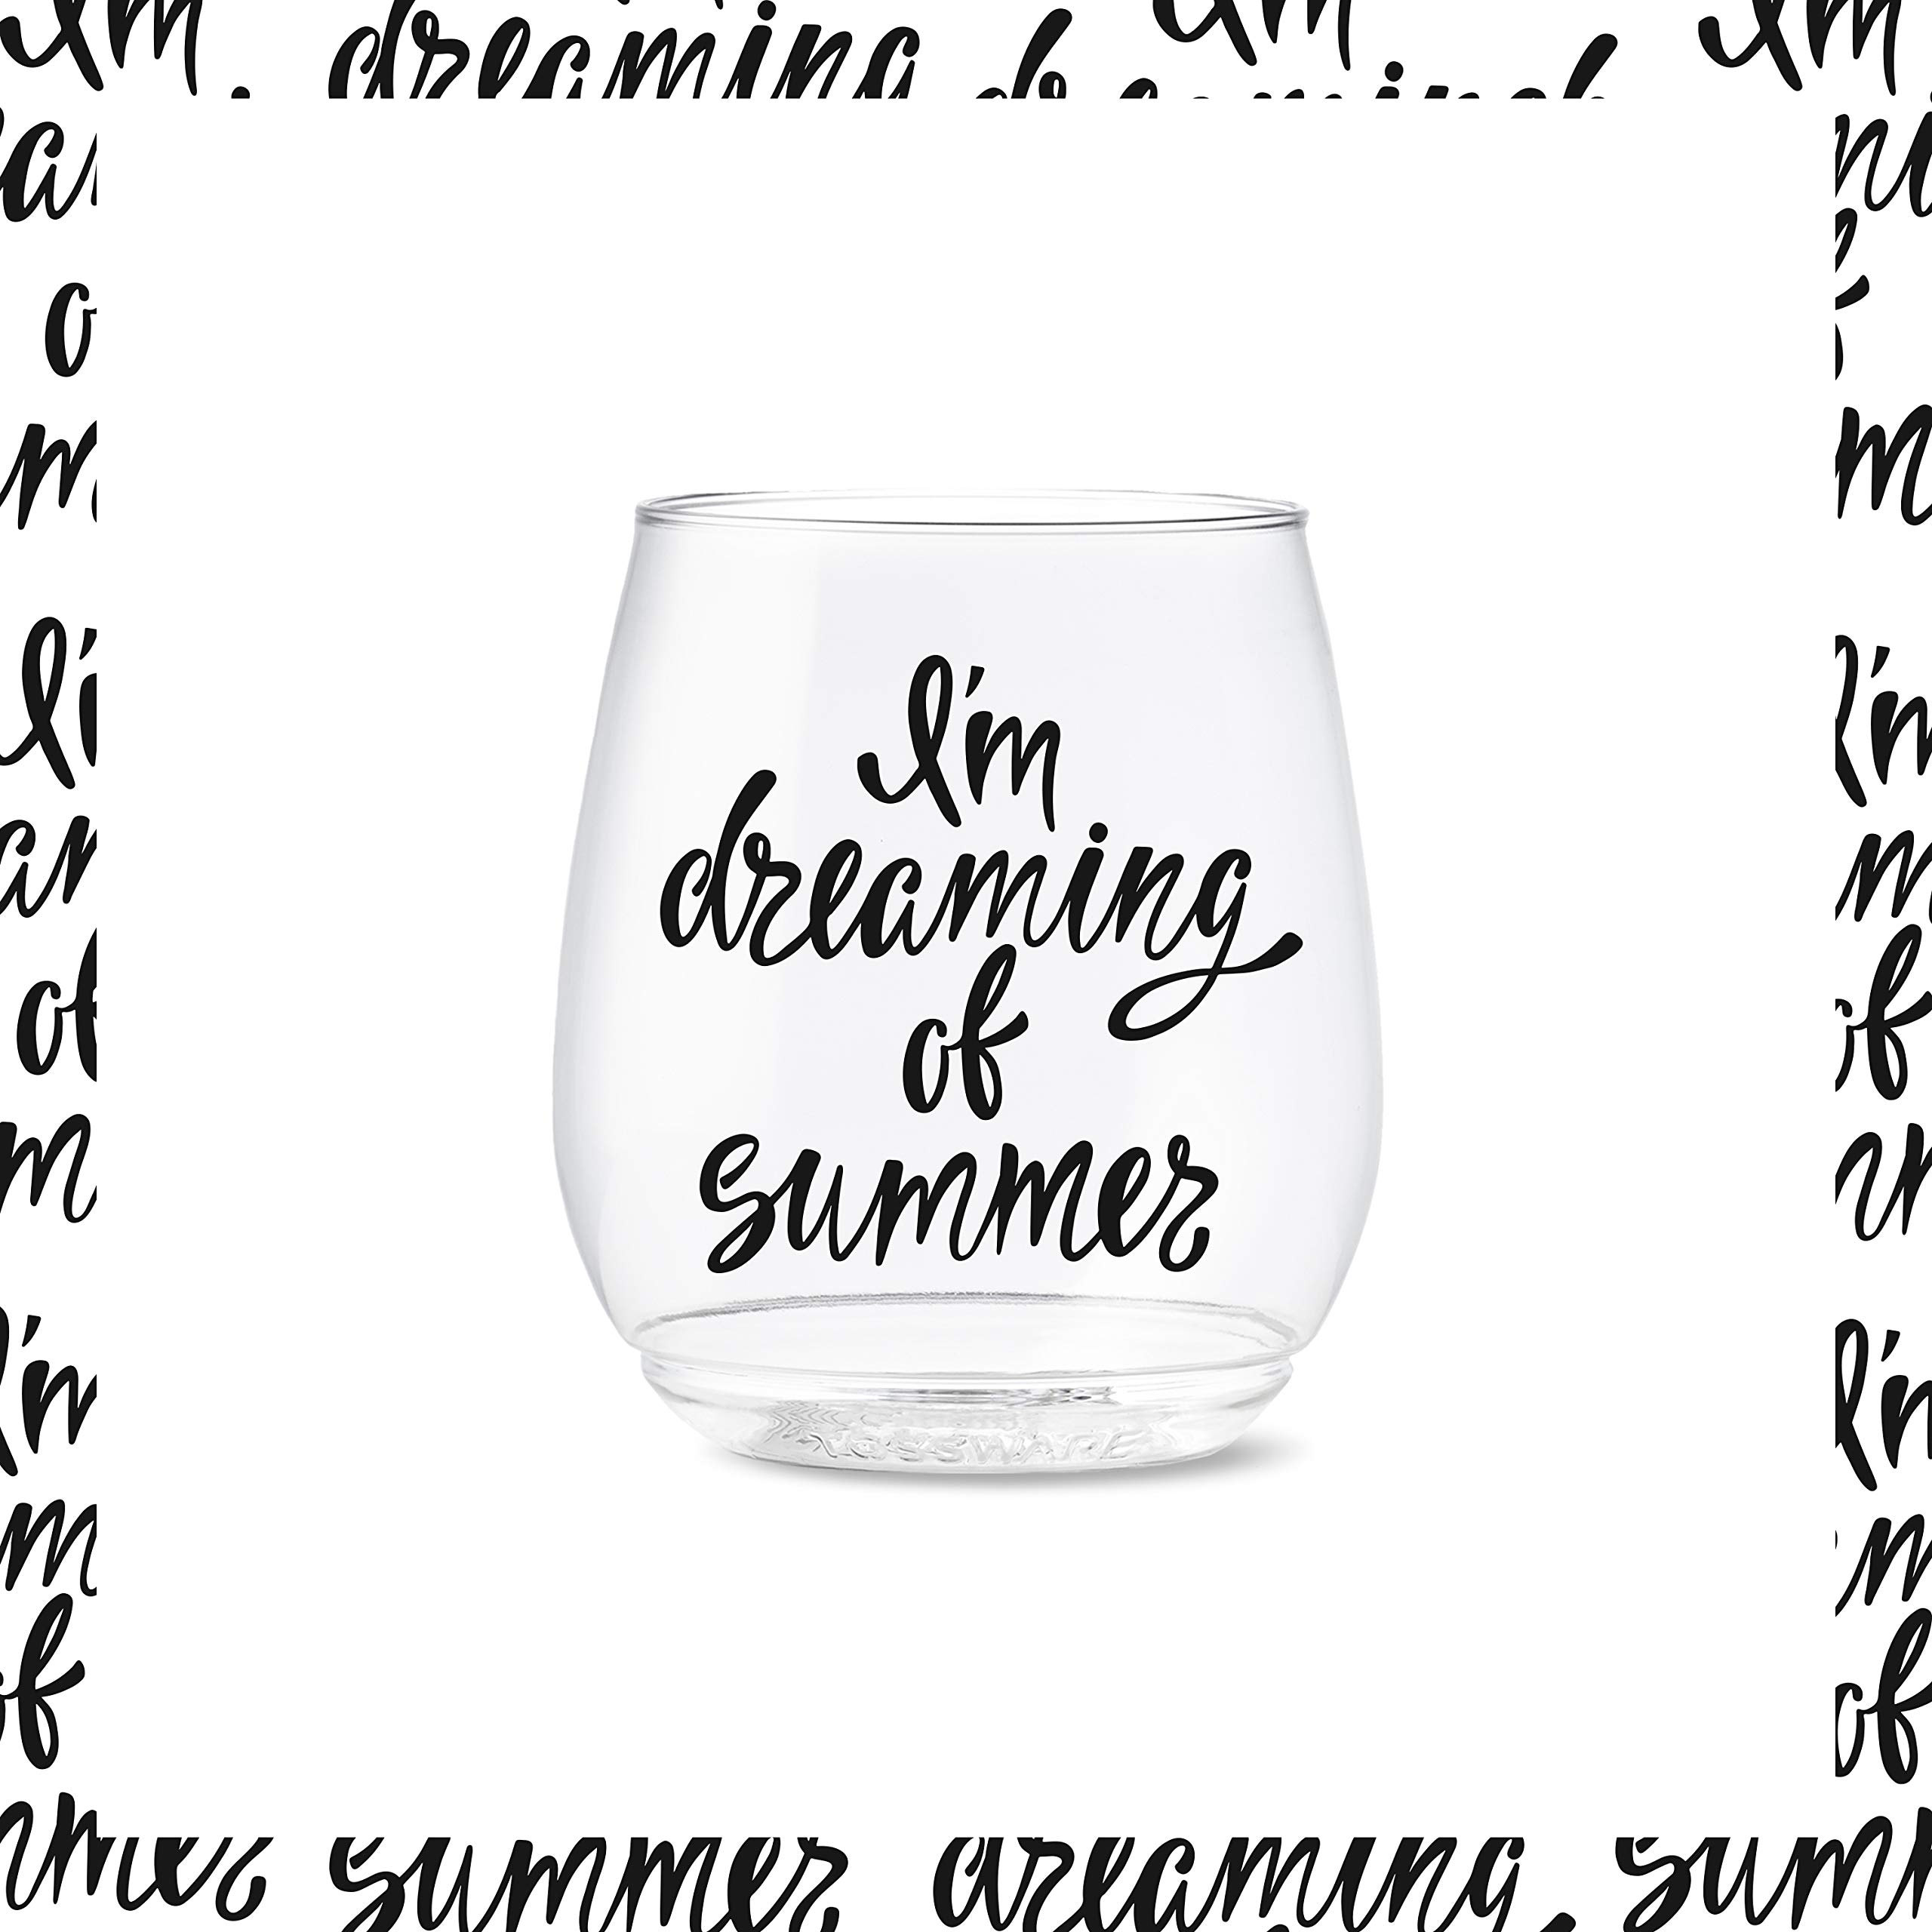 TOSSWARE POP 14oz Vino Summer Sips 2 Series, SET OF 6, Premium Quality, Recyclable, Unbreakable & Crystal Clear Plastic Wine Glasses